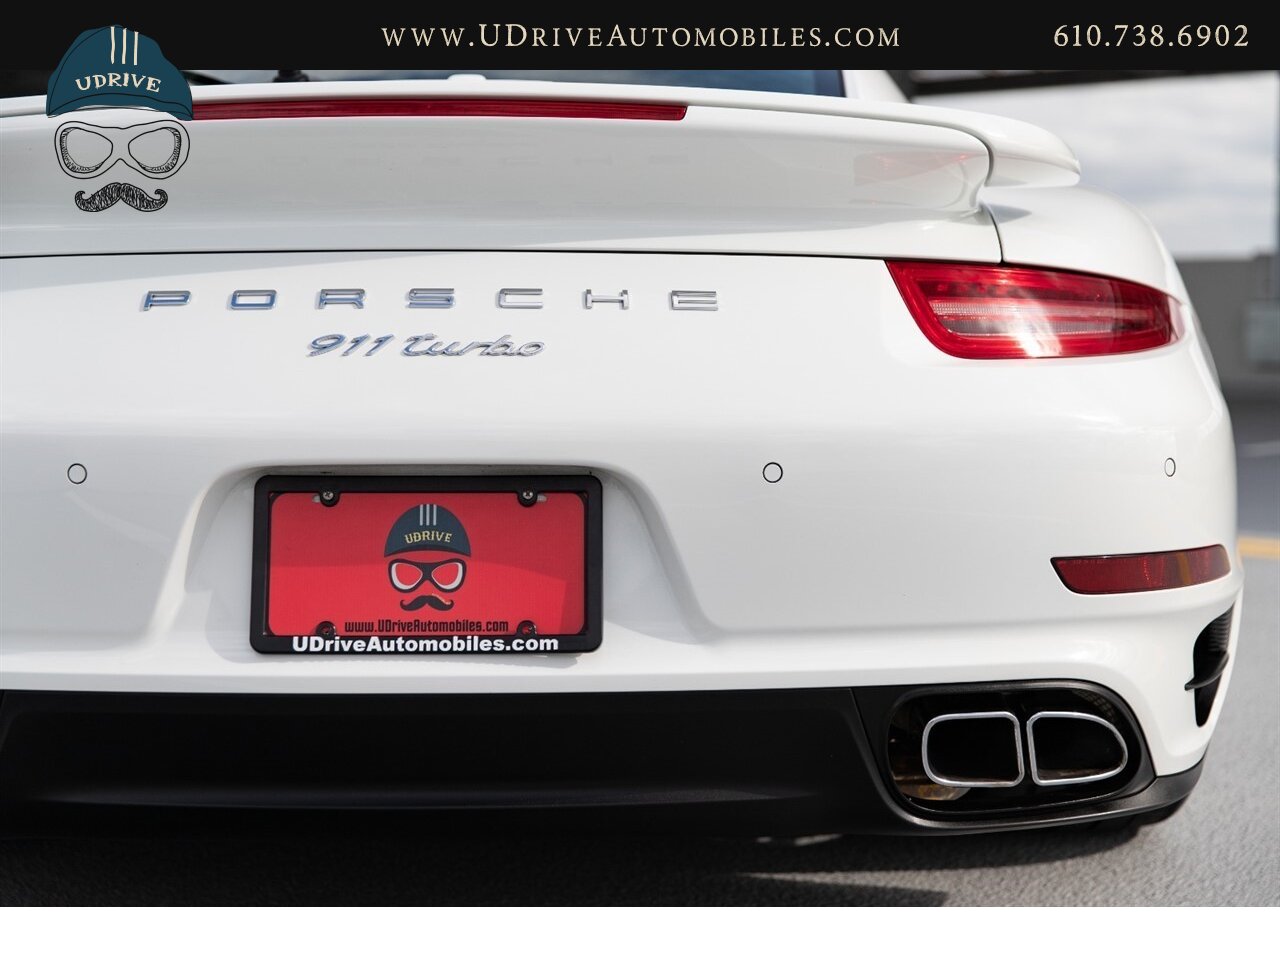 2014 Porsche 911 Turbo 12k Miles White over Black Chrono Rear Wiper  Sport Seats 20in Turbo Whls Sunroof Red Belts - Photo 18 - West Chester, PA 19382